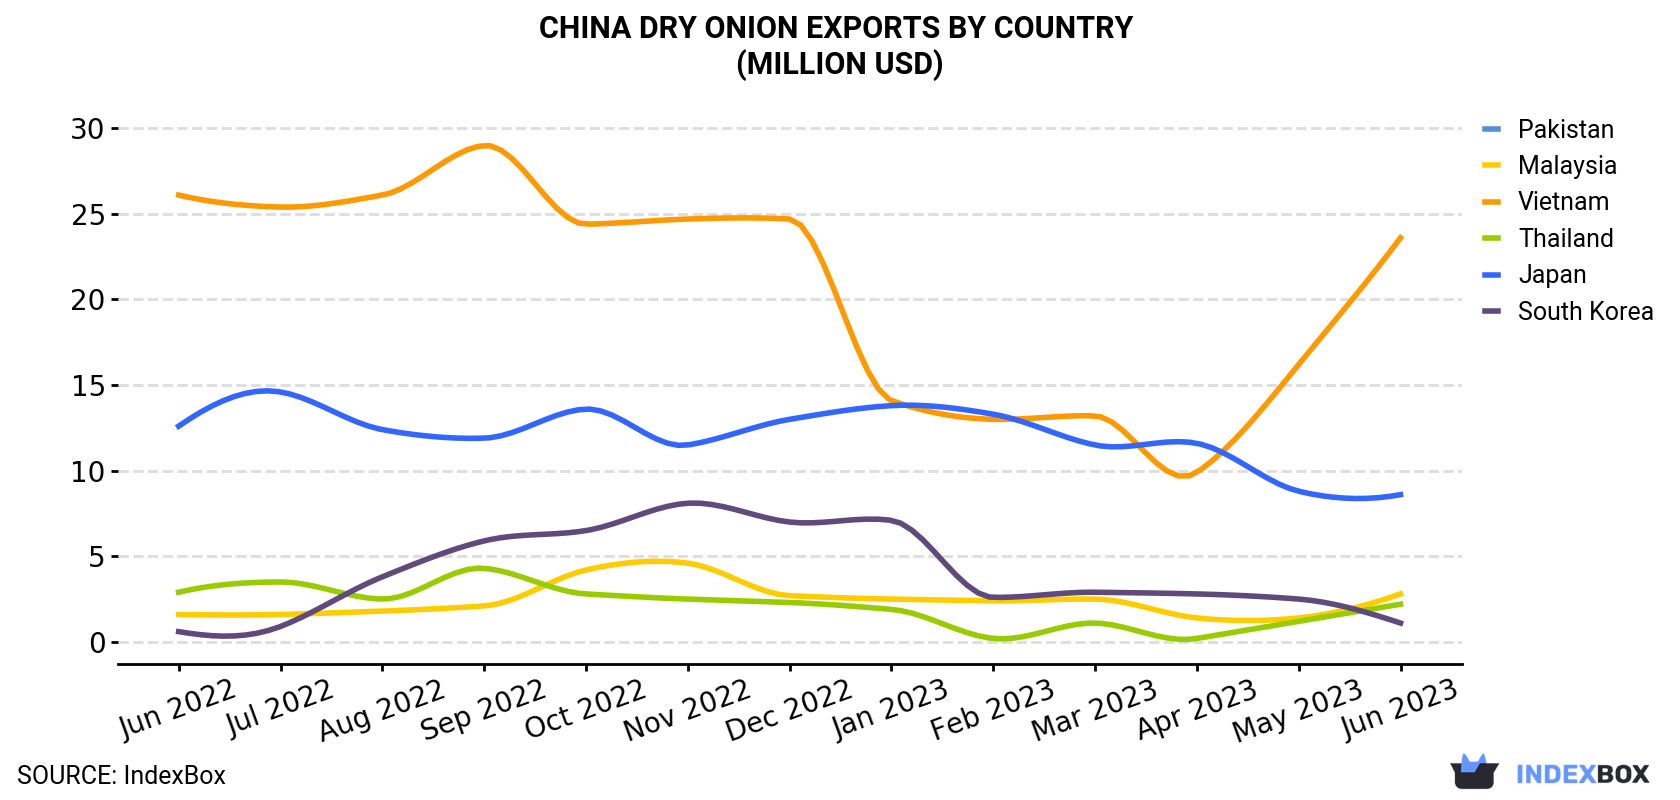 China Dry Onion Exports By Country (Million USD)